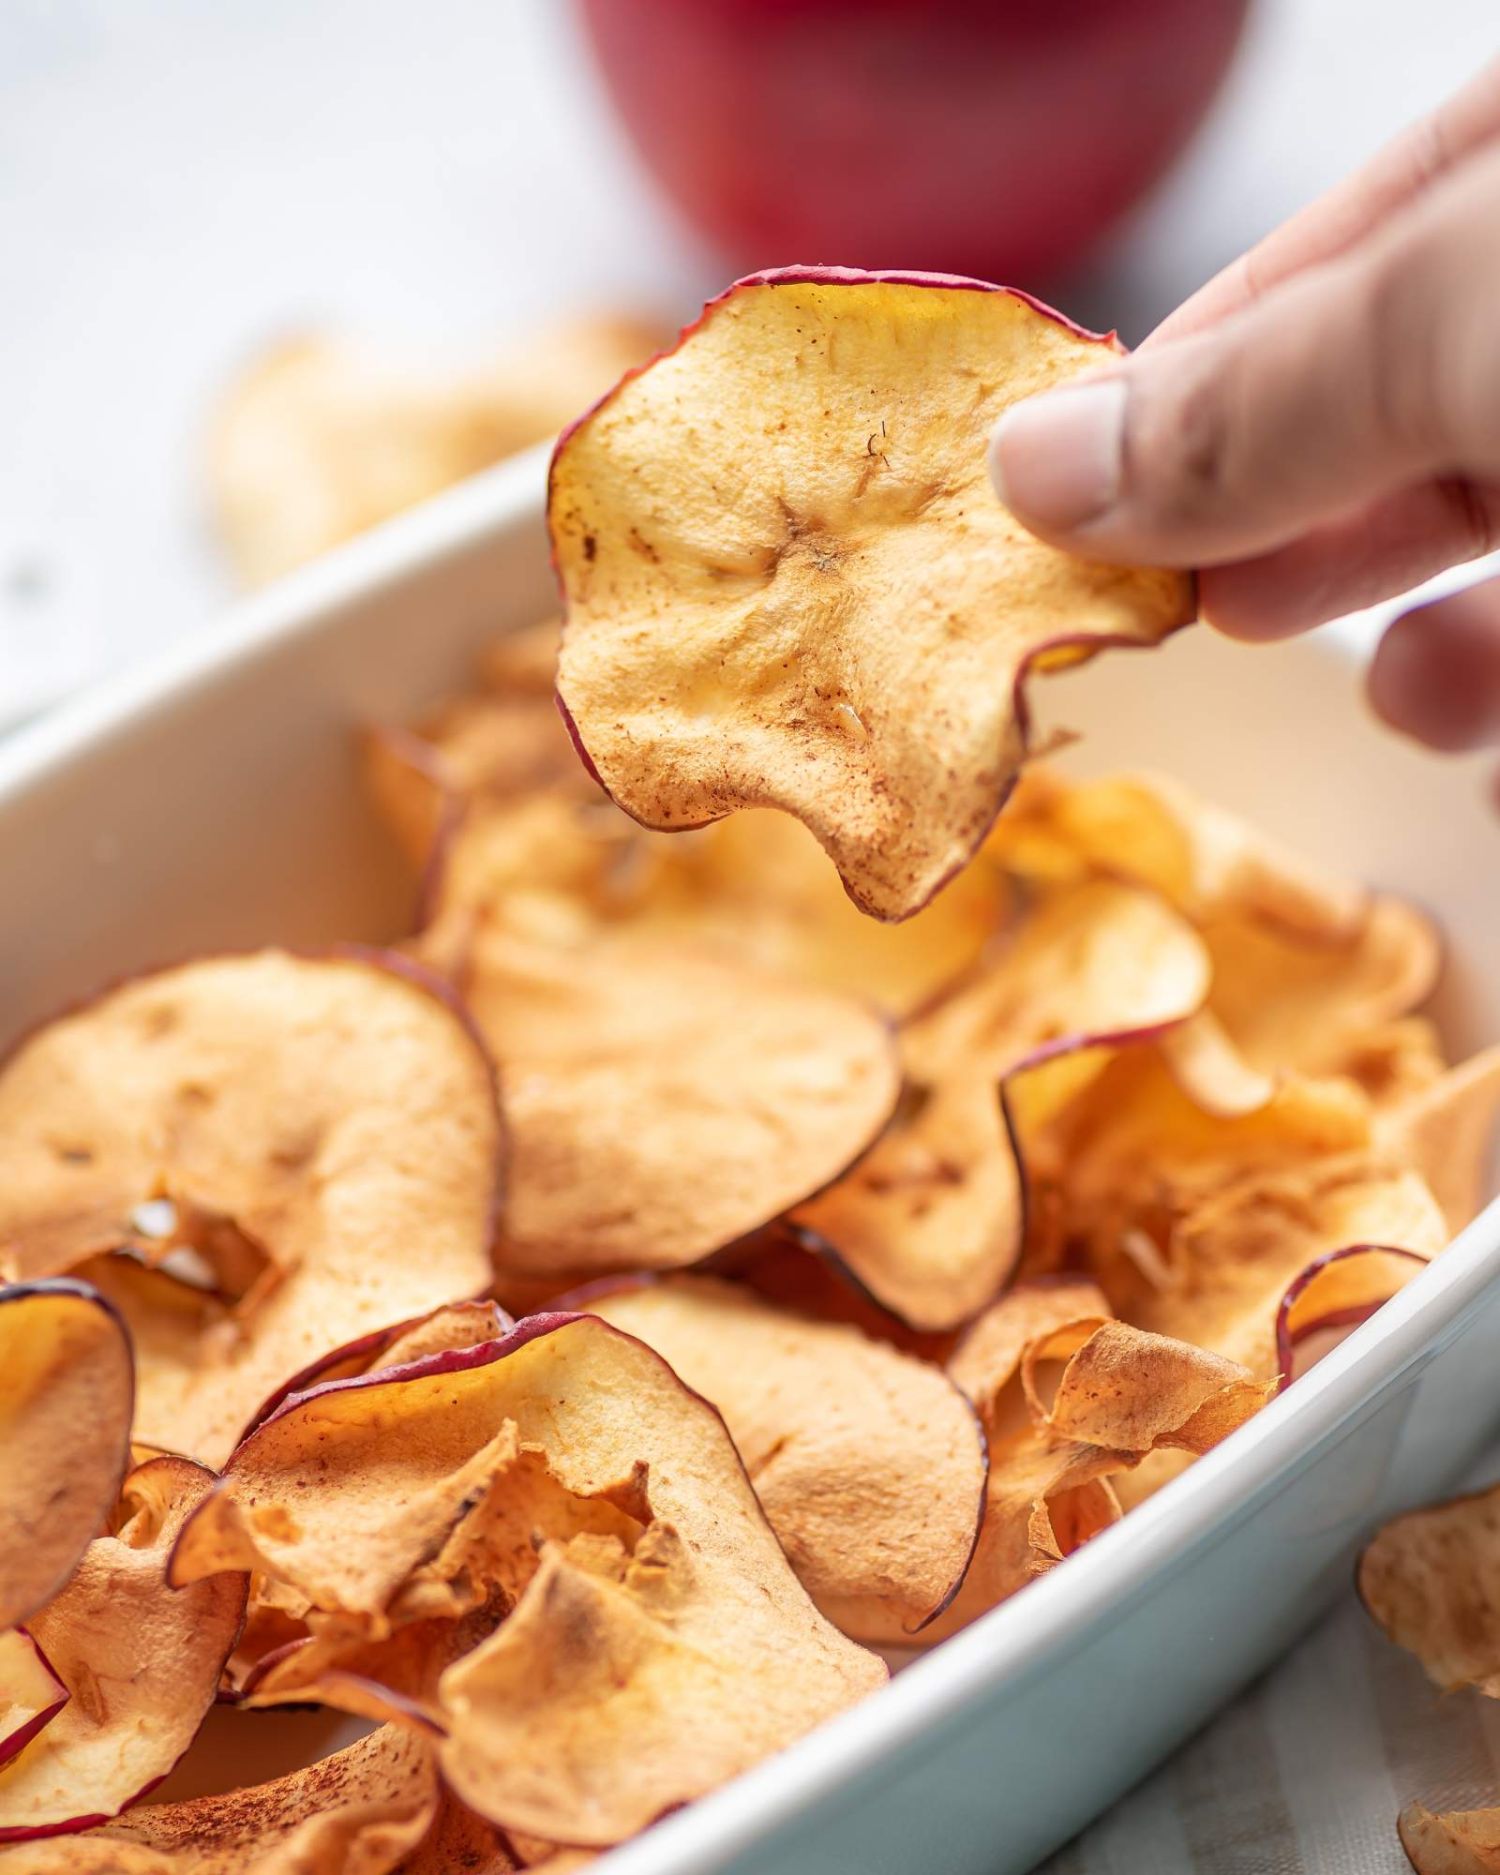 Cinnamon apple chip being held up by a hand over a dish of apple chips.